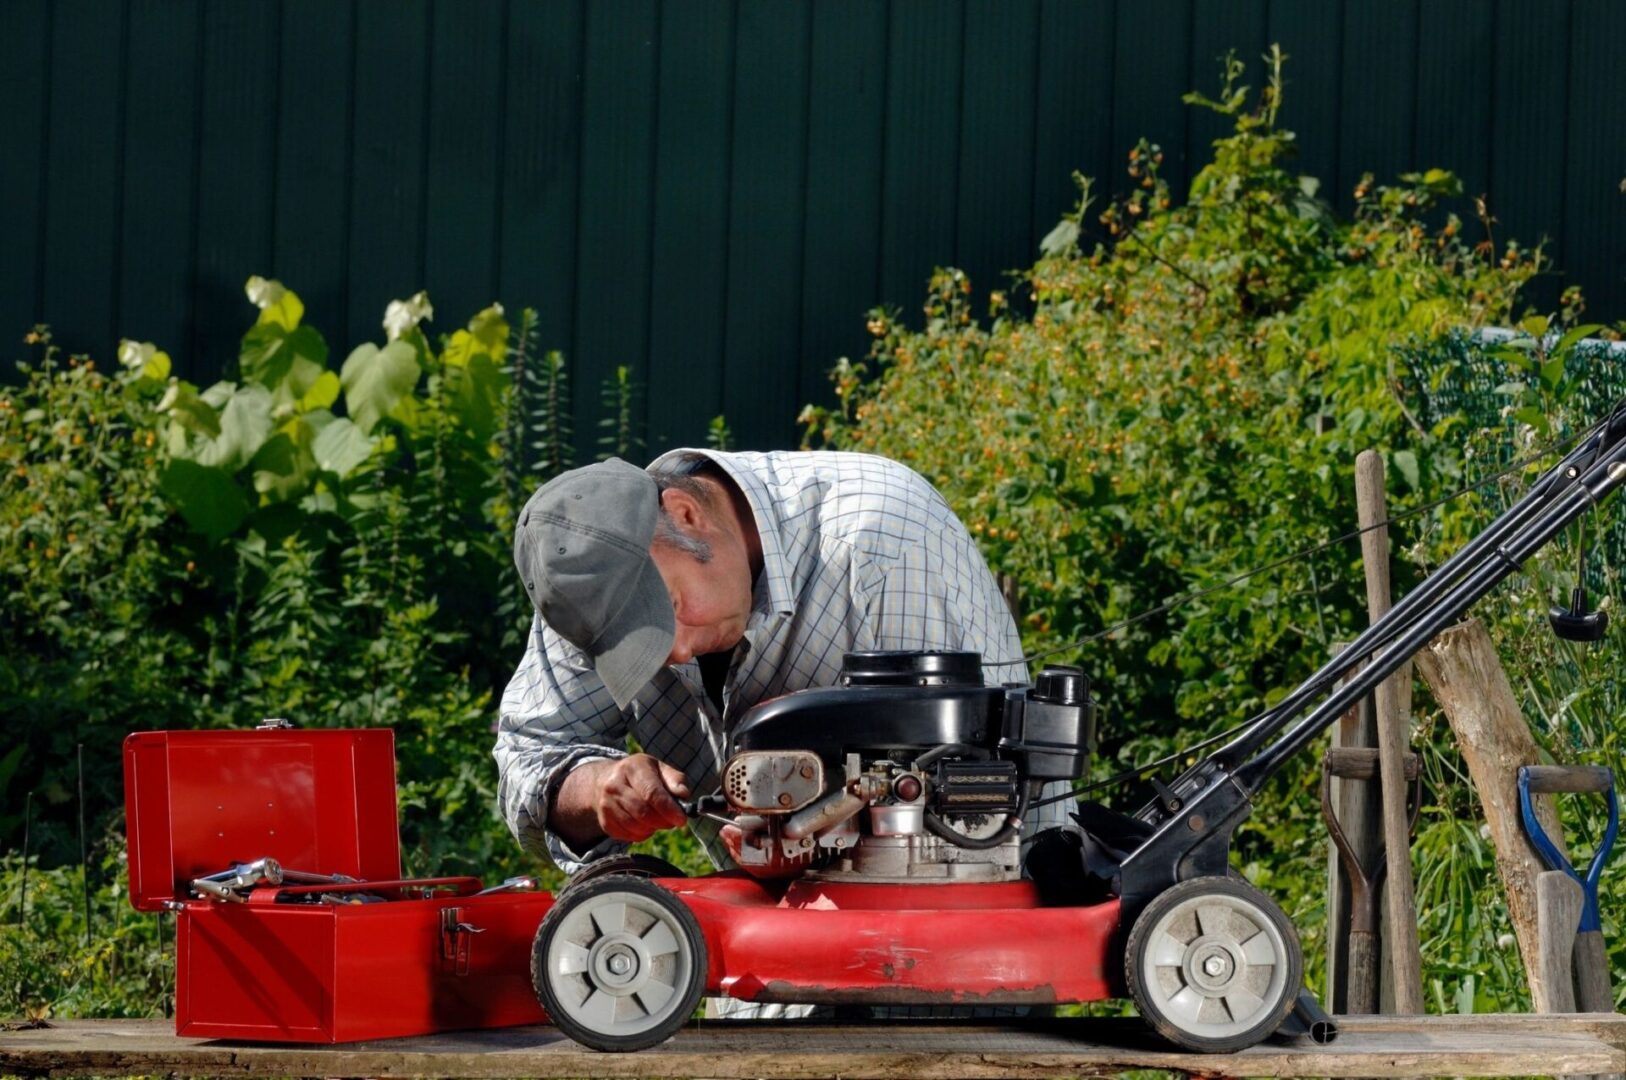 A man working on a red lawn mower.